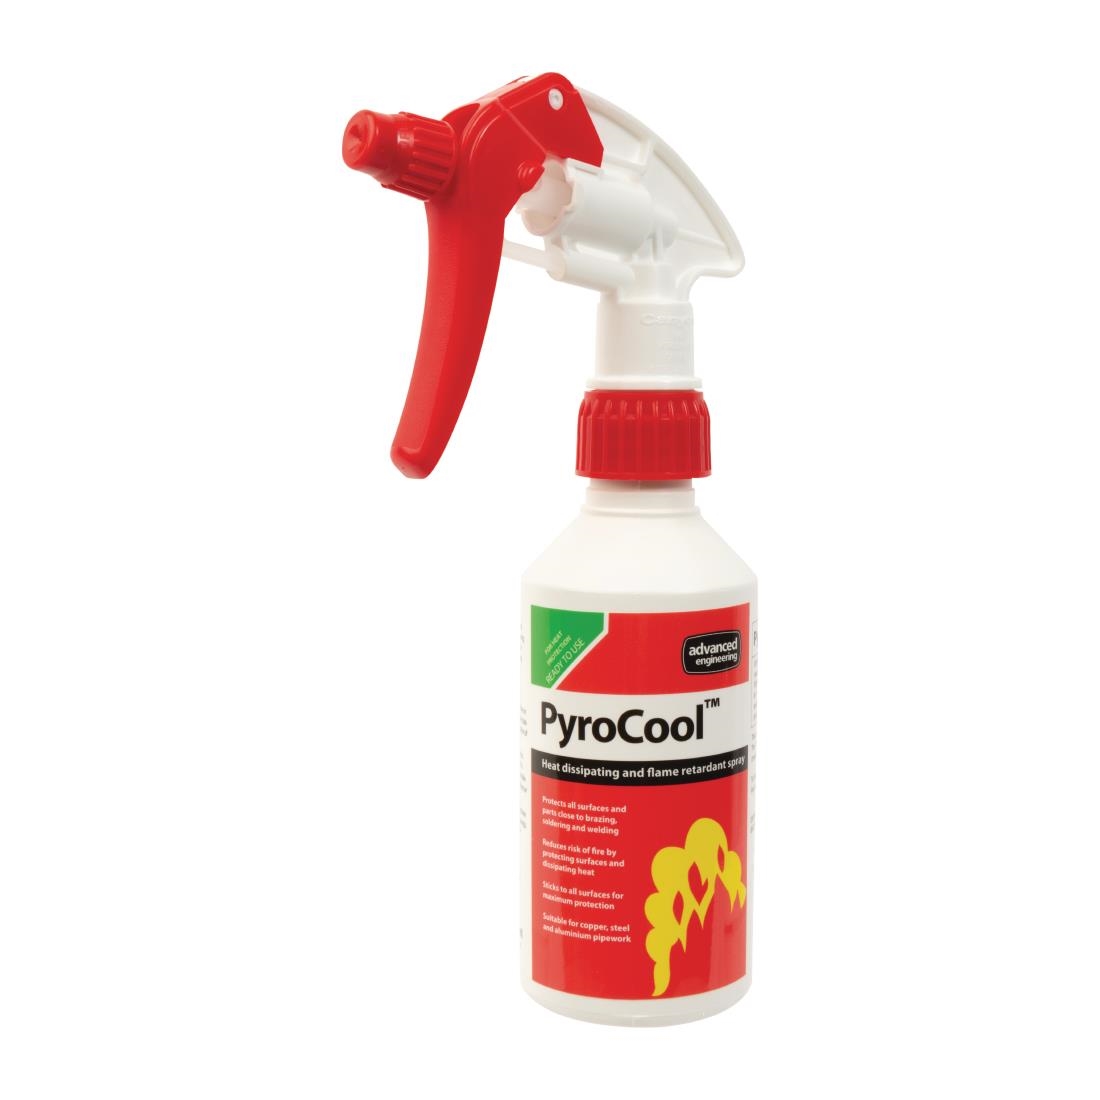 PyroCool Heat Dissipating and Flame Retardant Spray Ready To Use 250ml (12 Pack)